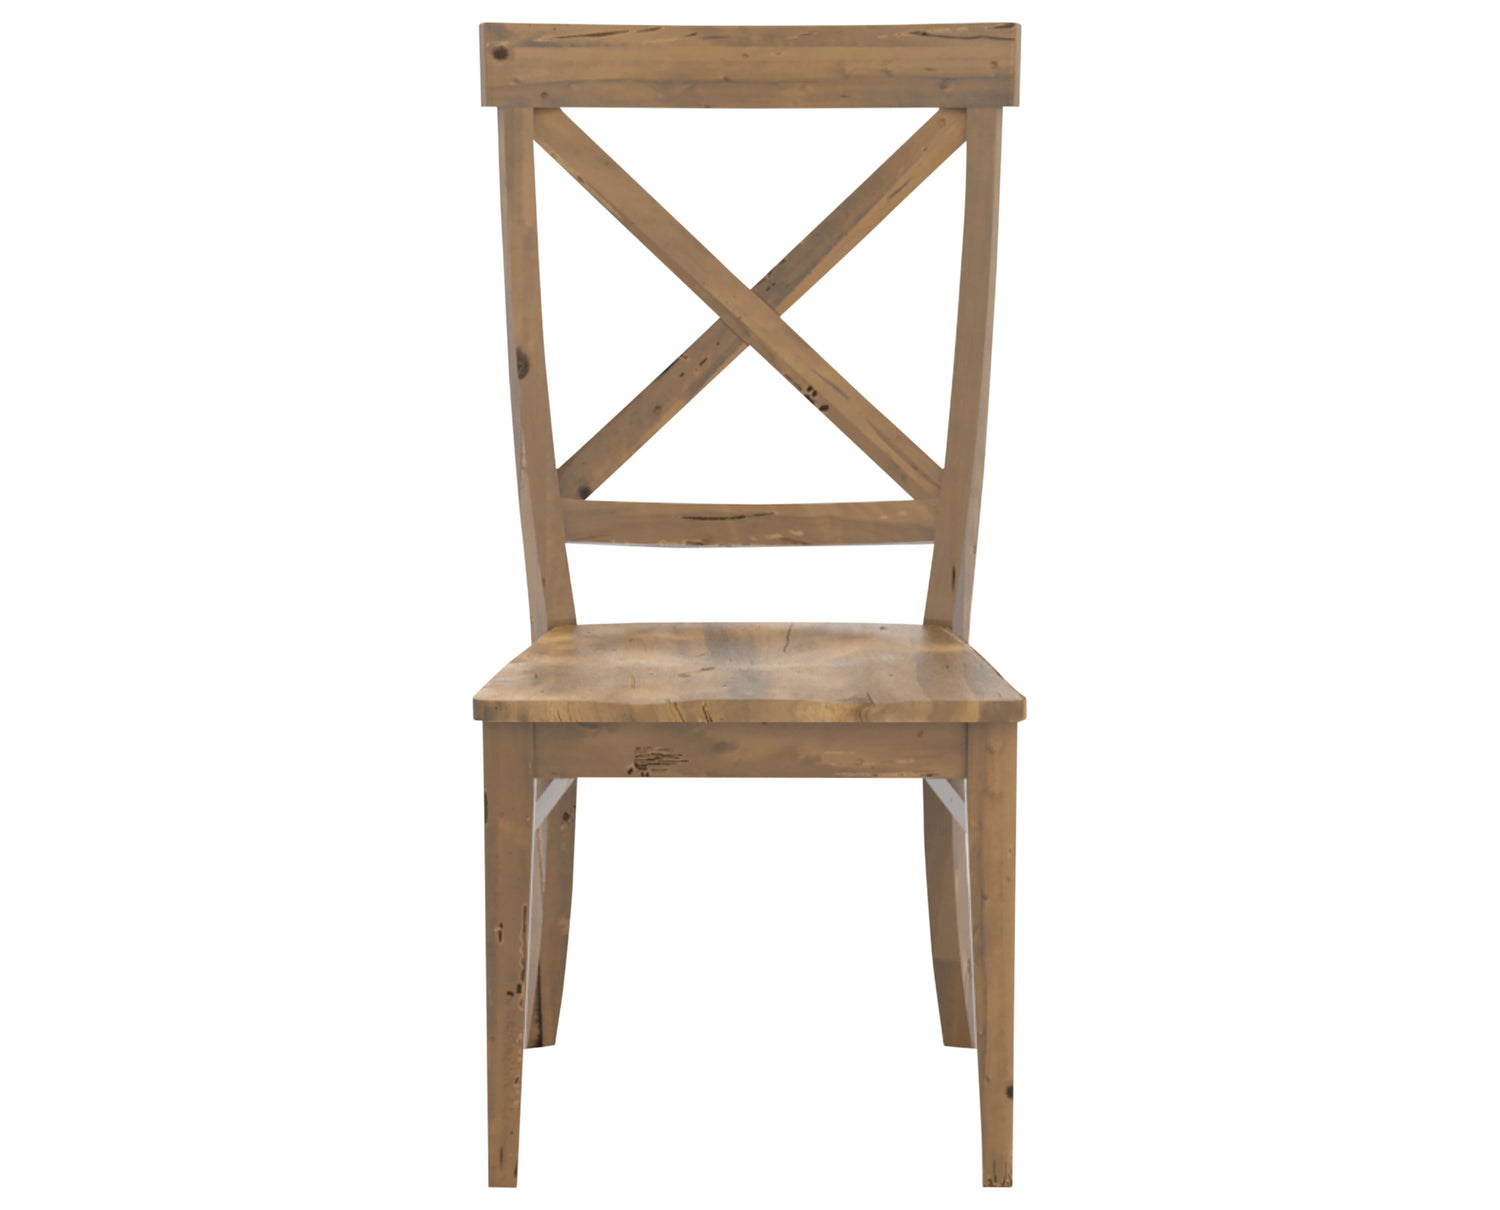 Oak Washed | Canadel Champlain Dining Chair 5186 | Valley Ridge Furniture